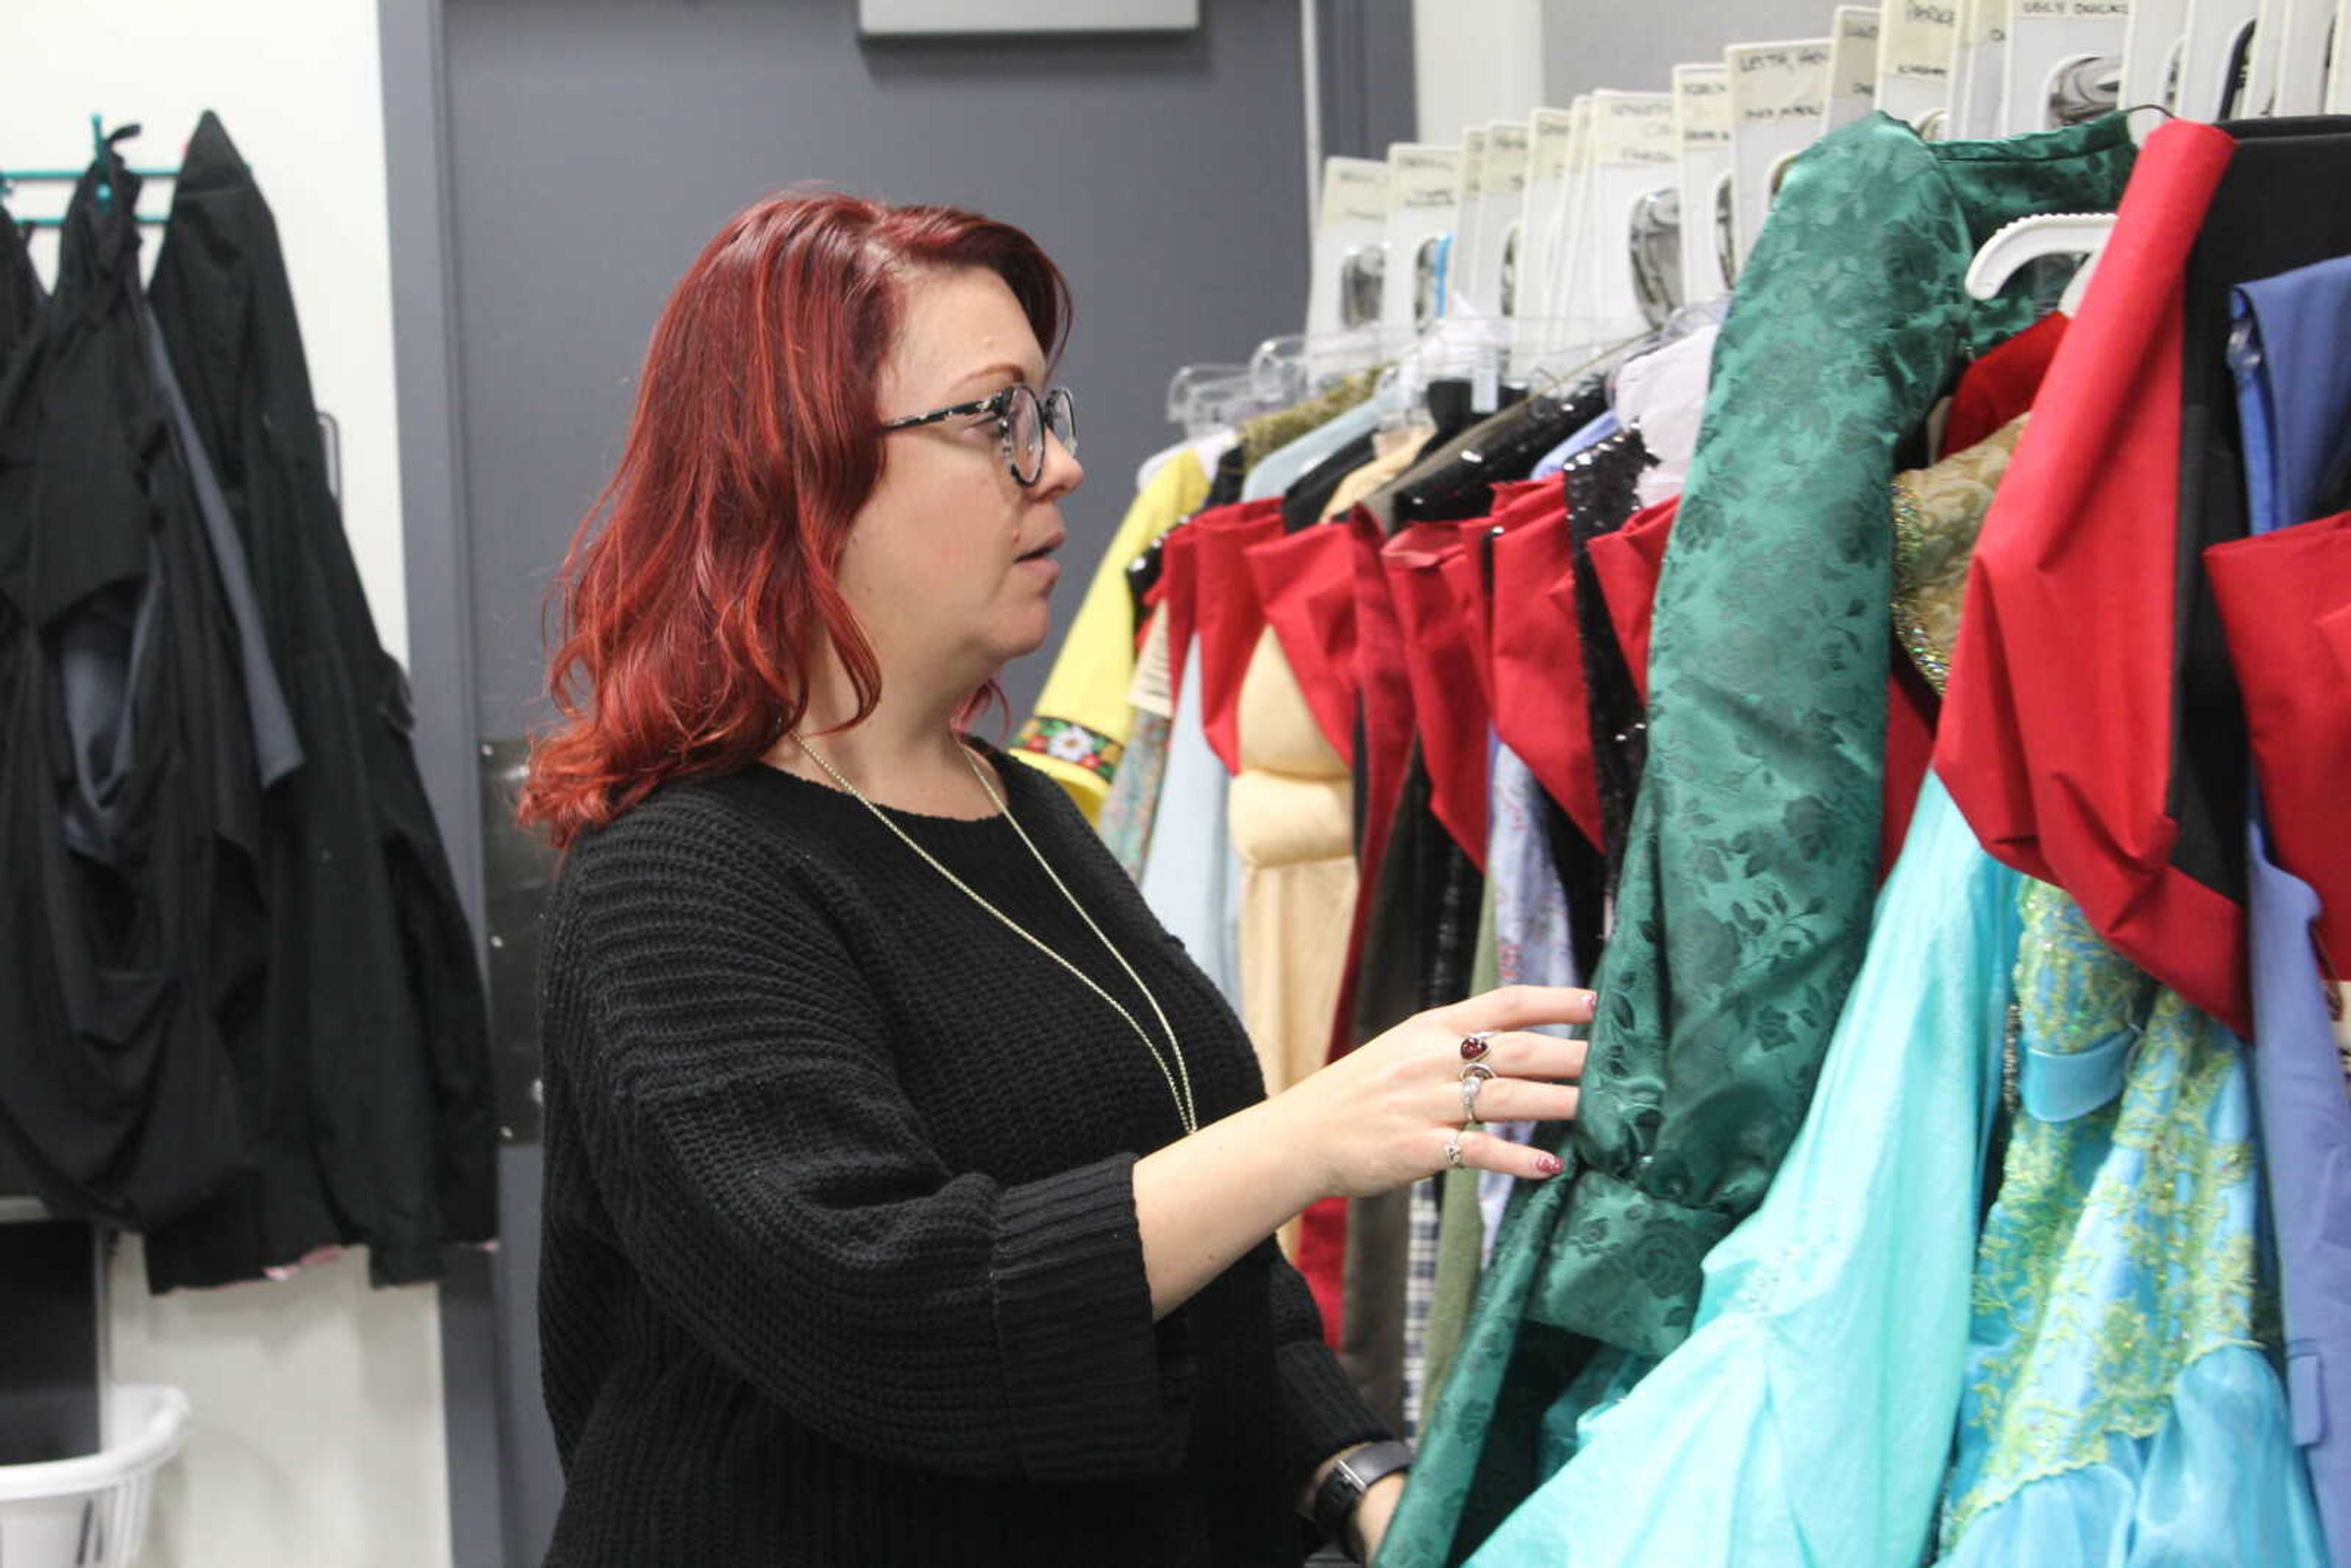 Assistant Professor of Theatre - Costume Designer Amber Cook going through the costumes for "Shrek: the Musical" in the costume shop on River Campus, Jan. 24, 2020.